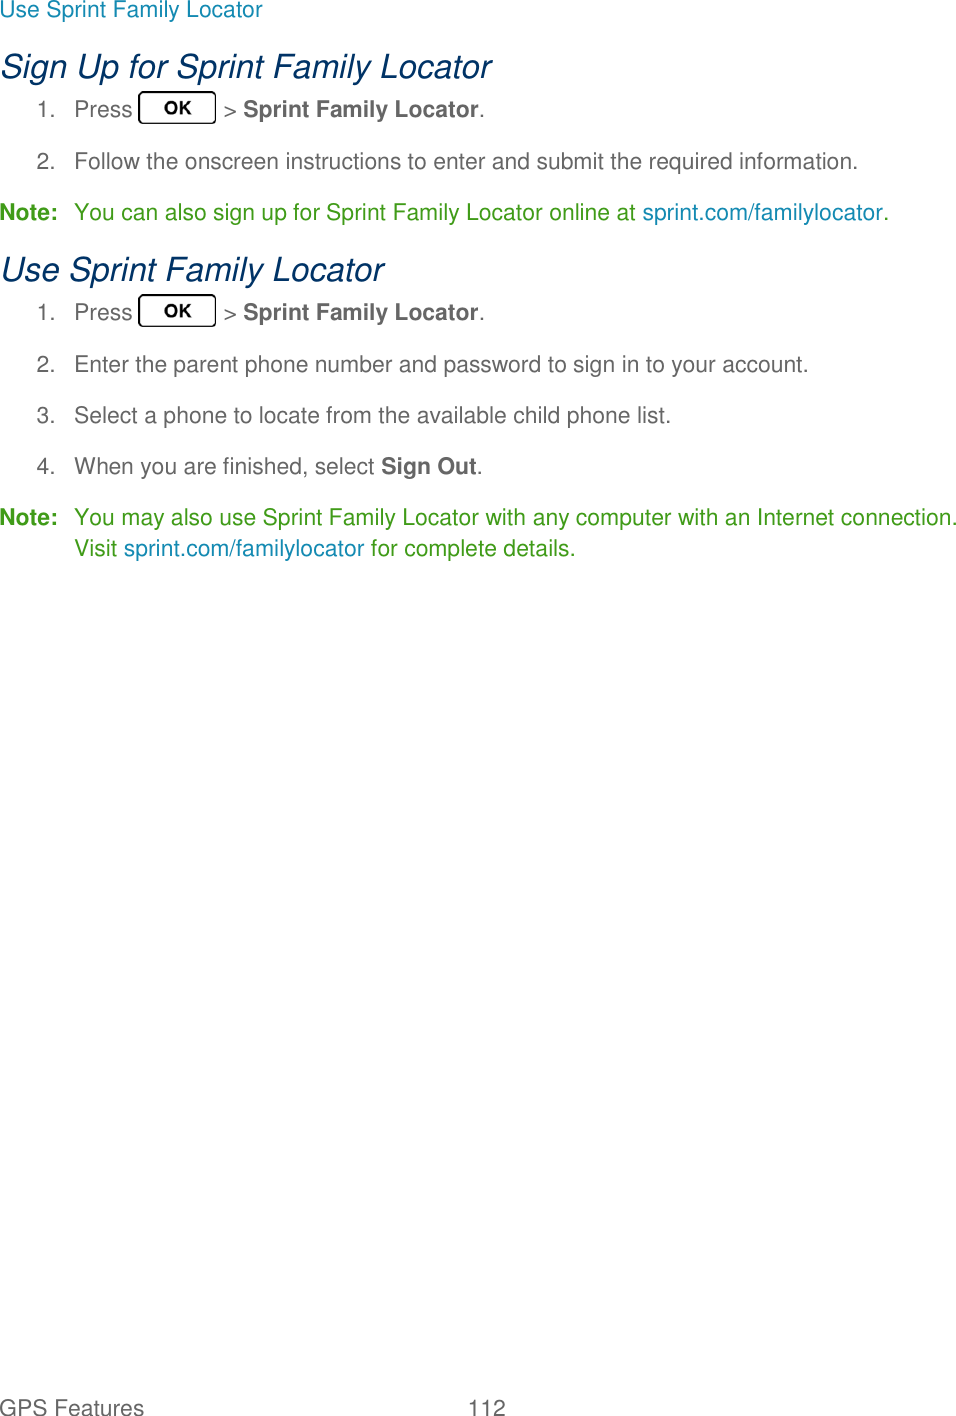 GPS Features  112   Use Sprint Family Locator Sign Up for Sprint Family Locator 1.  Press   &gt; Sprint Family Locator. 2.  Follow the onscreen instructions to enter and submit the required information. Note:  You can also sign up for Sprint Family Locator online at sprint.com/familylocator. Use Sprint Family Locator 1.  Press   &gt; Sprint Family Locator. 2.  Enter the parent phone number and password to sign in to your account. 3.  Select a phone to locate from the available child phone list. 4.  When you are finished, select Sign Out. Note:  You may also use Sprint Family Locator with any computer with an Internet connection. Visit sprint.com/familylocator for complete details.  